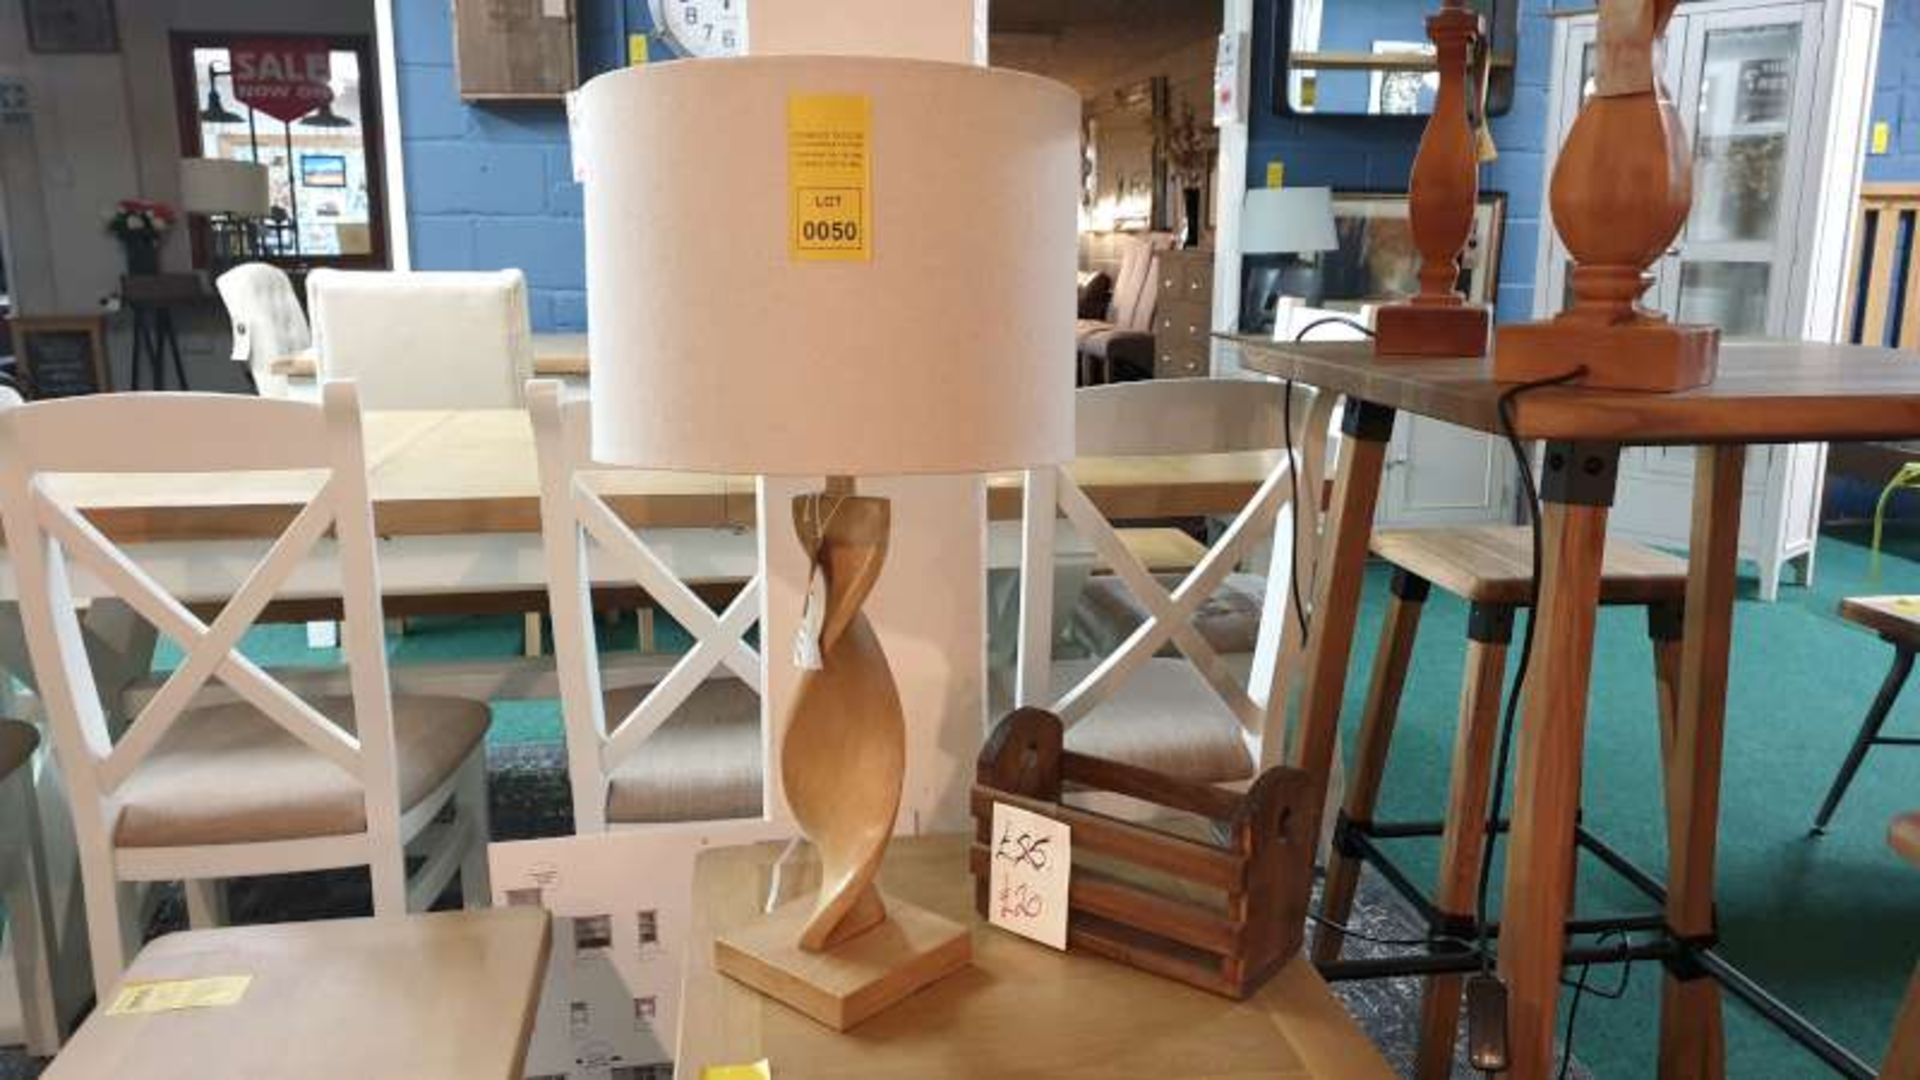 ATKINS WOODEN BASE LAMP WITH BEIGE SHADE RRP £129 AND A WOODEN LETTER RACK